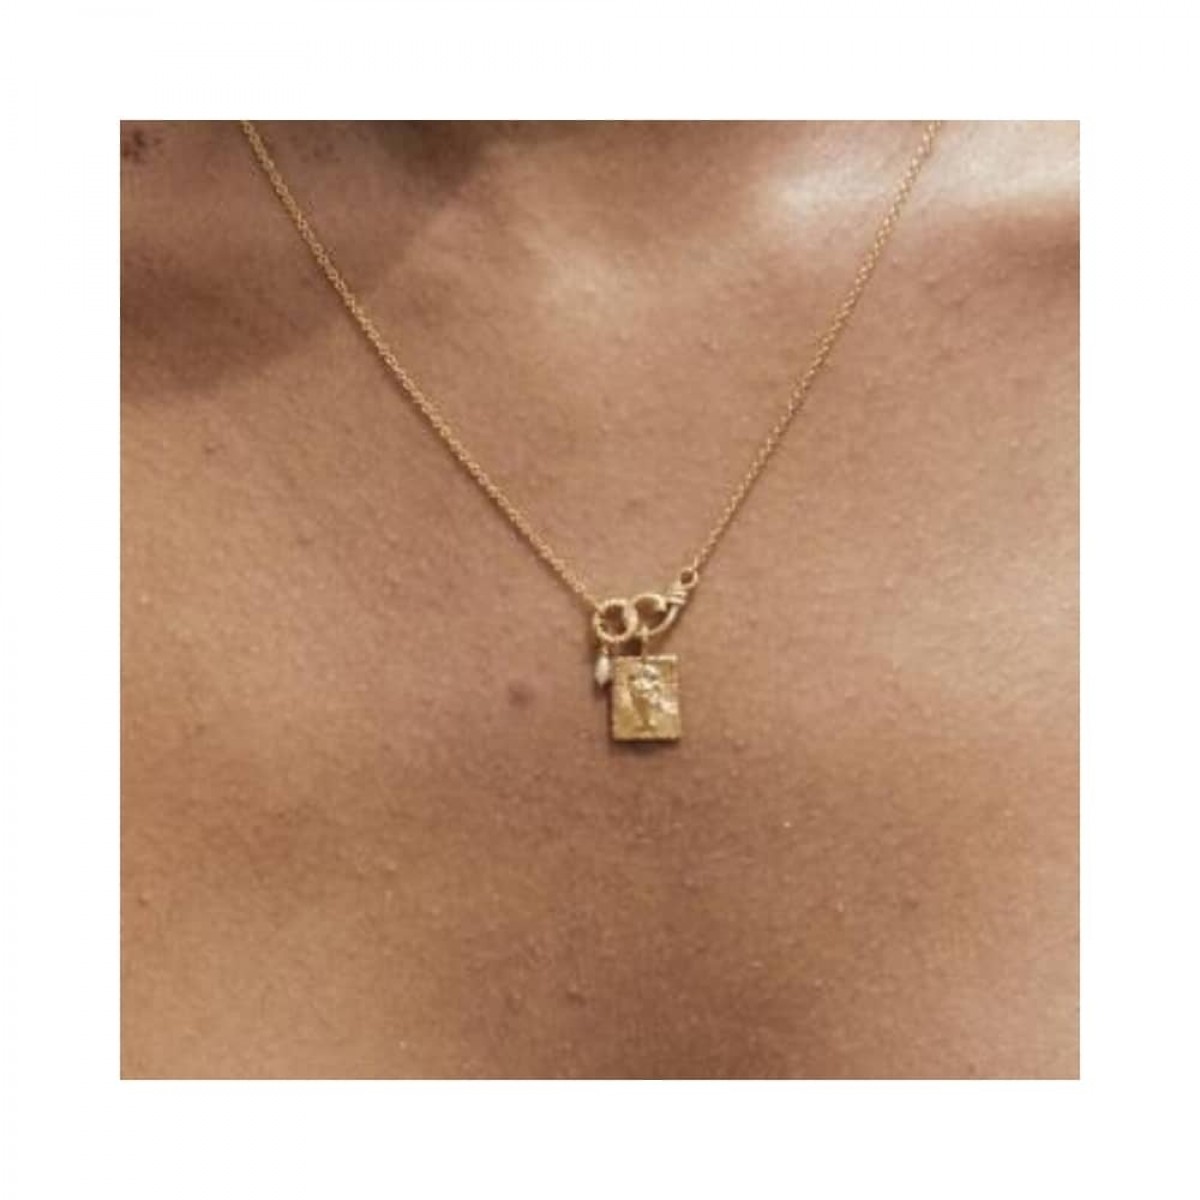 anni lu the gold life necklace - gold - model hals 